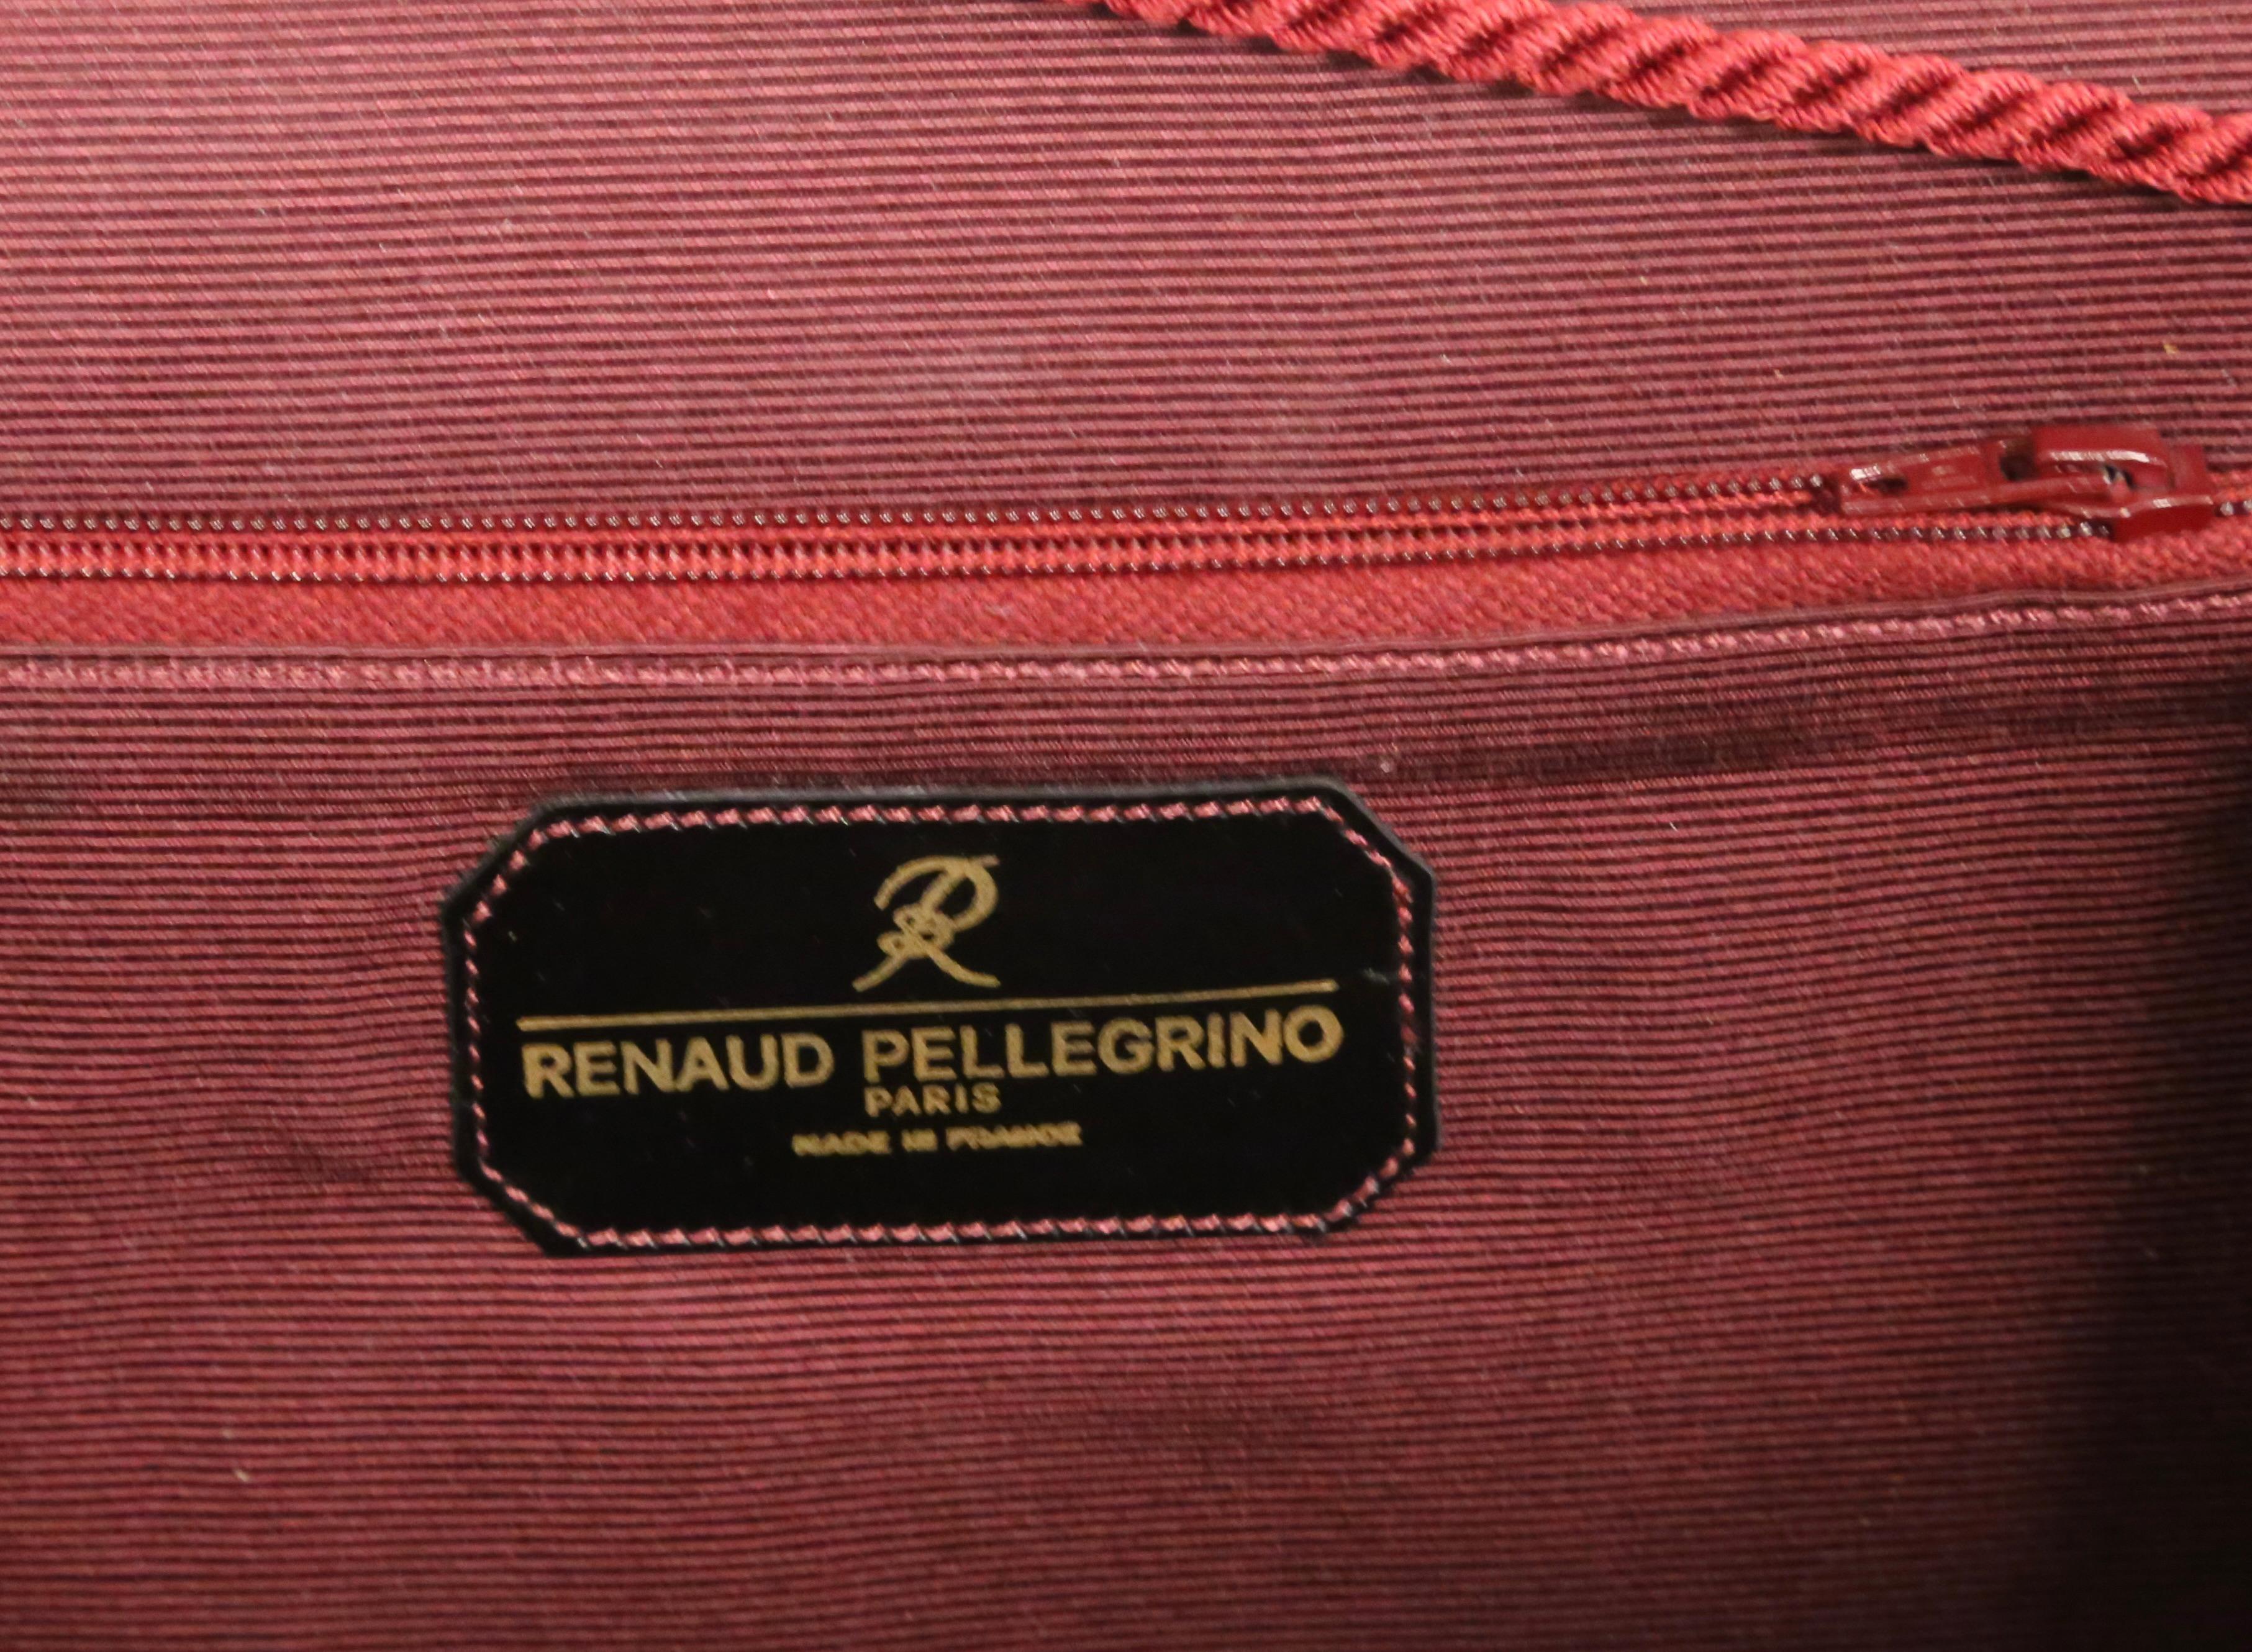  1990's RENAUD PELLEGRINO textured leather convertible shoulder clutch bag For Sale 4